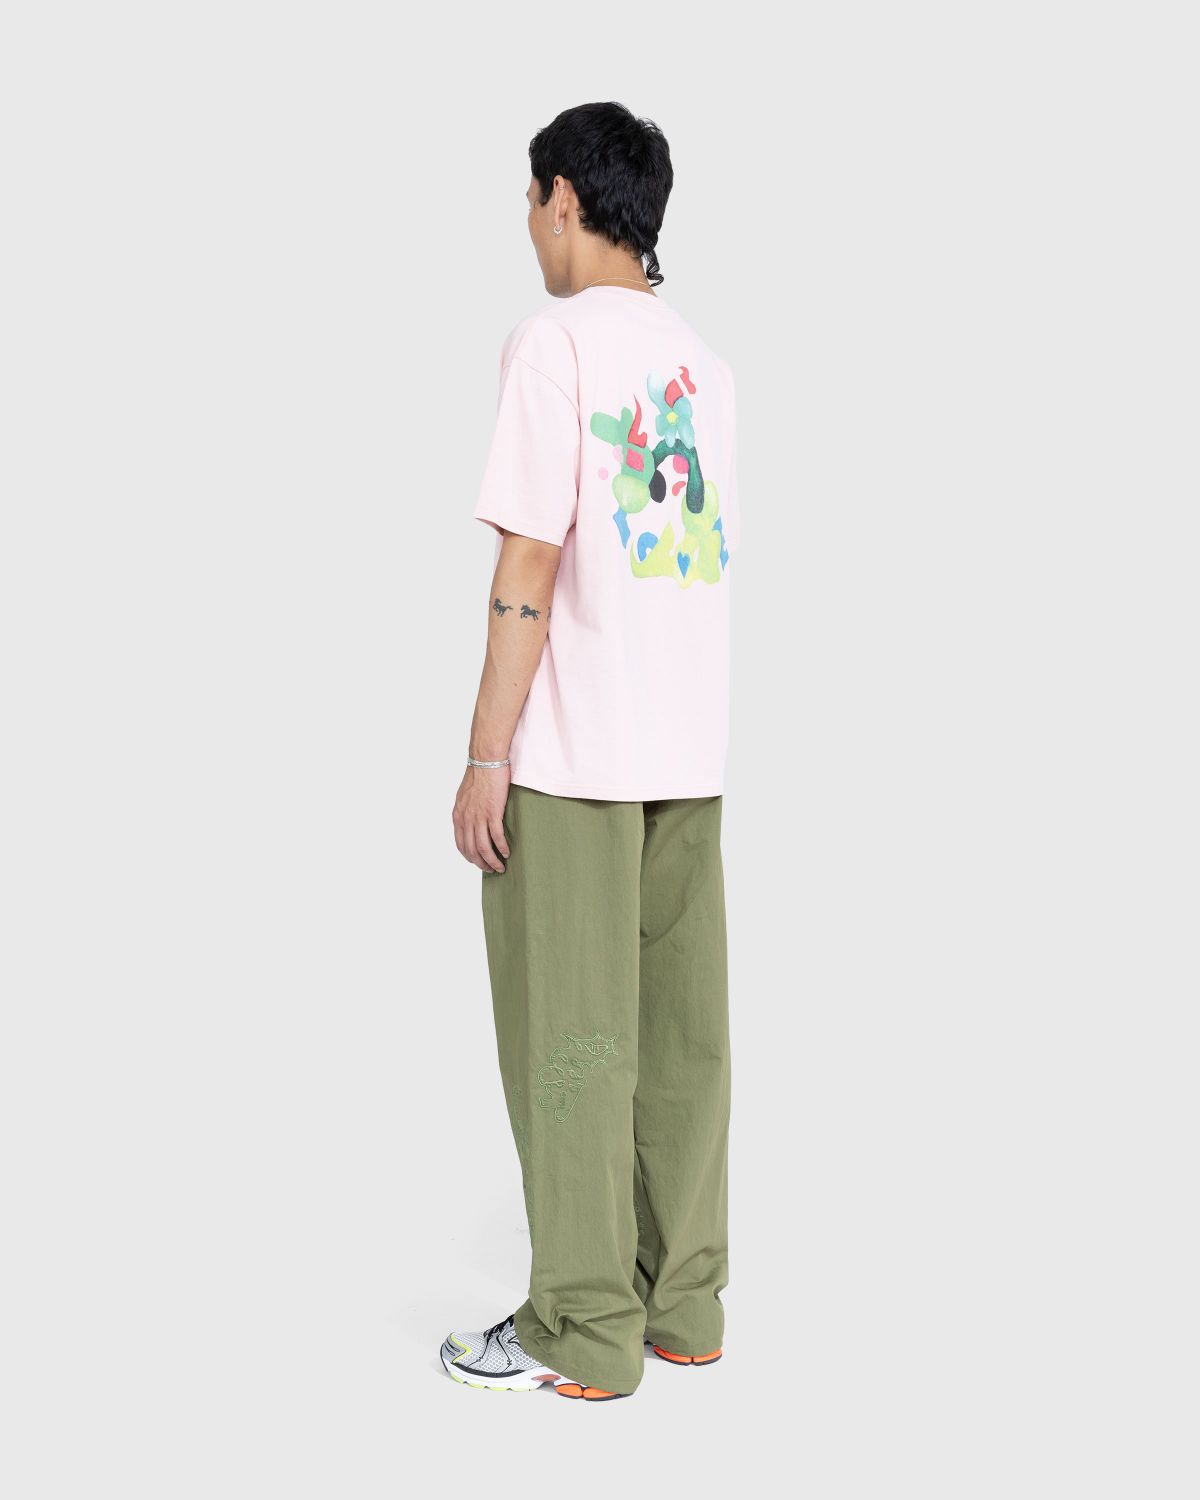 NTS x Highsnobiety – Graphic T-Shirt Pink  - Tops - Pink - Image 4